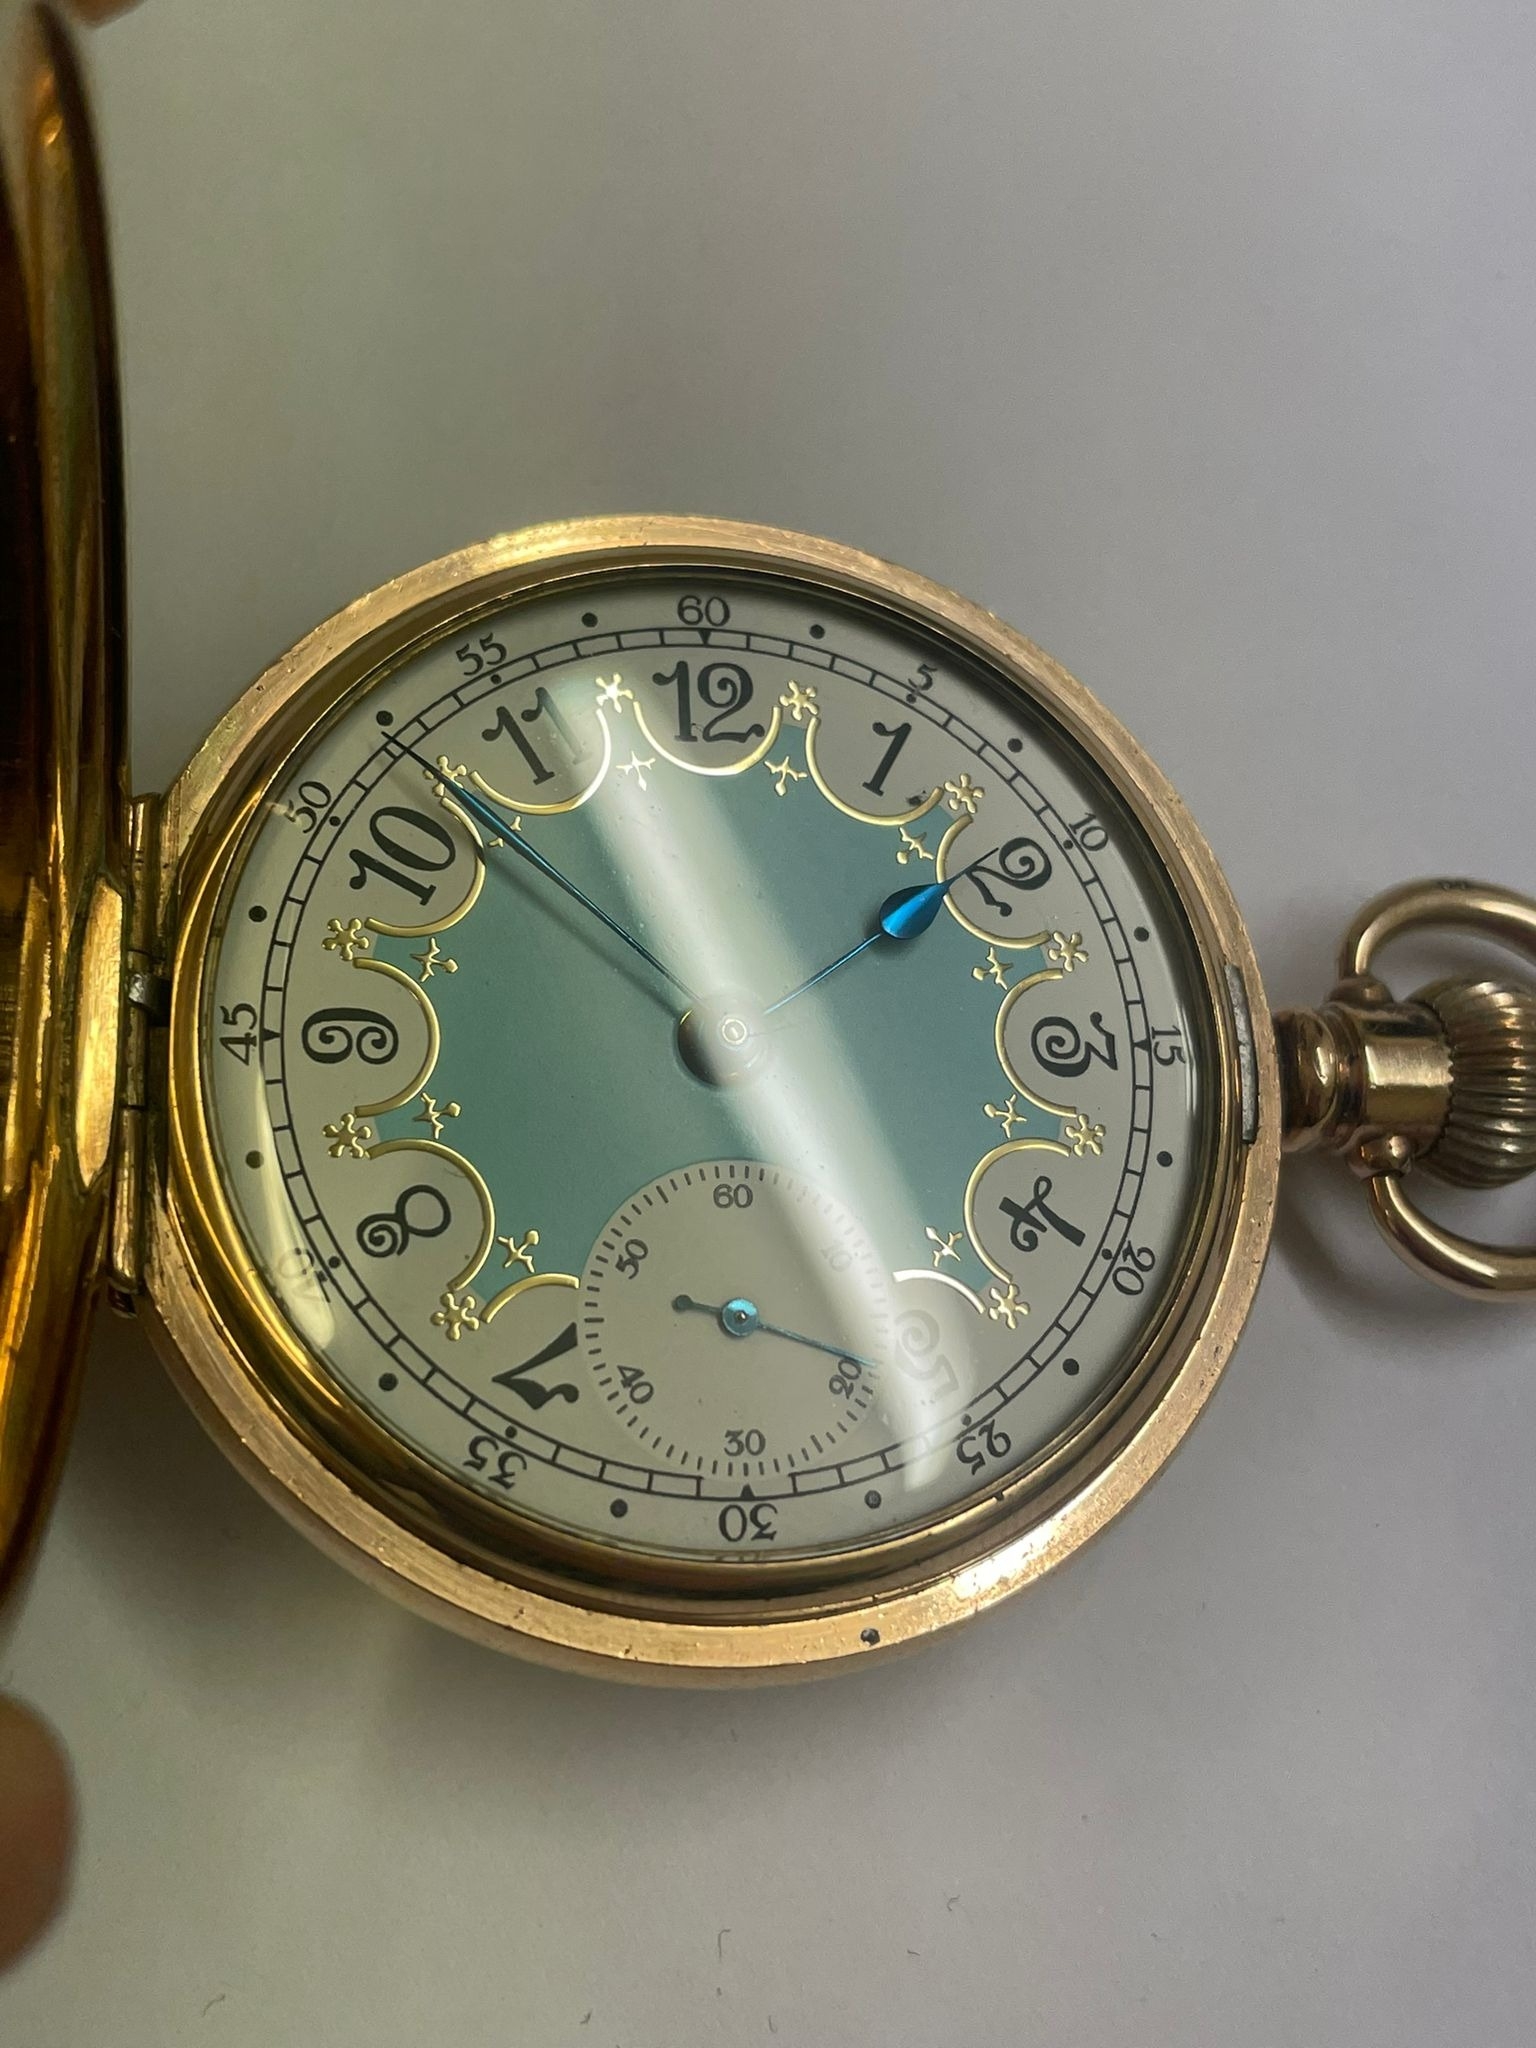 A Waltham full hunter pocket watch. In working order. - Image 2 of 3